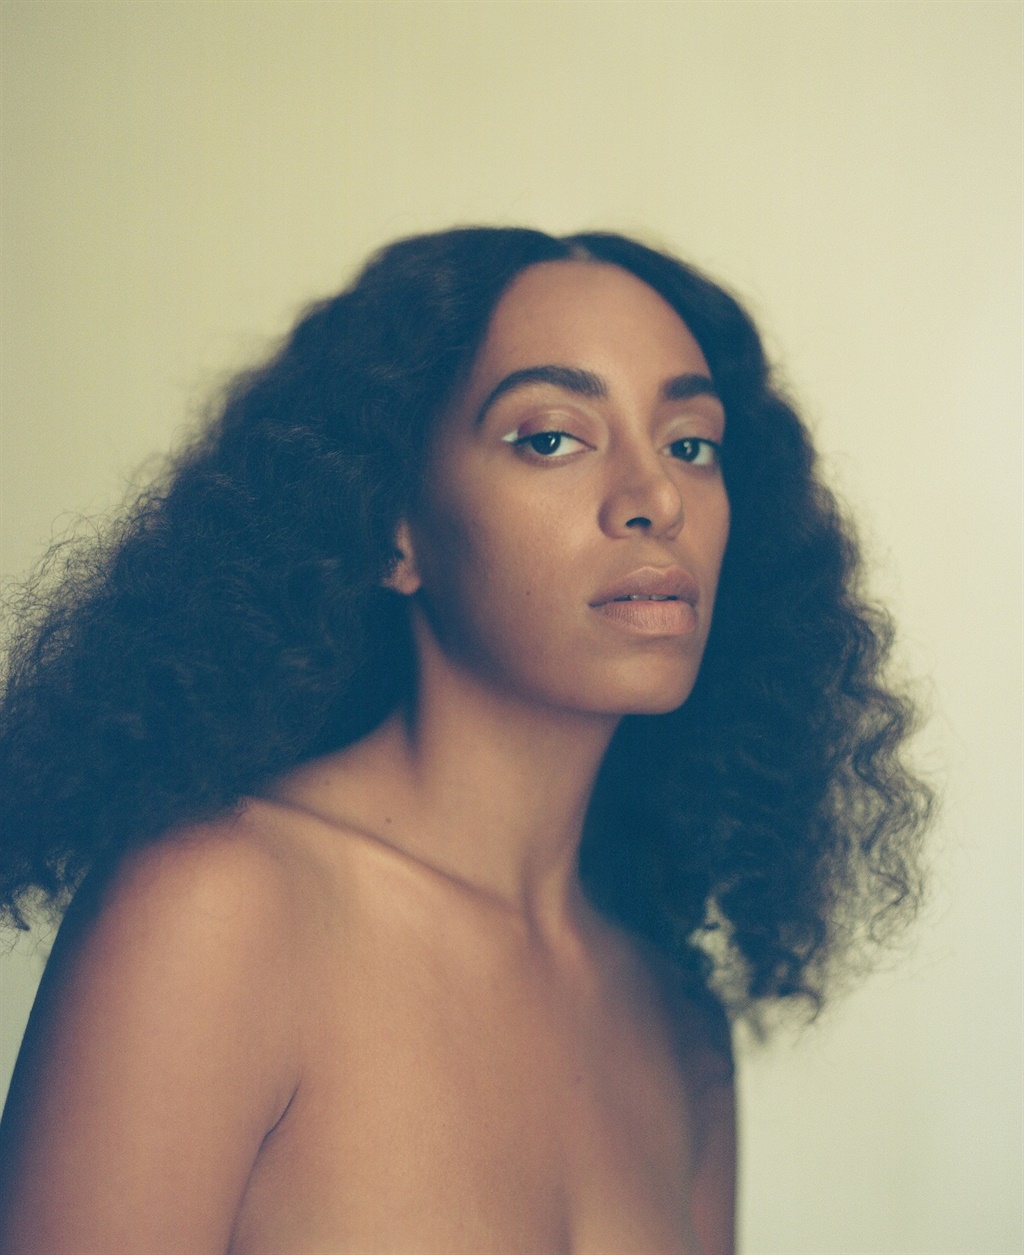 American singer, songwriter, model and actress, Solange Knowles